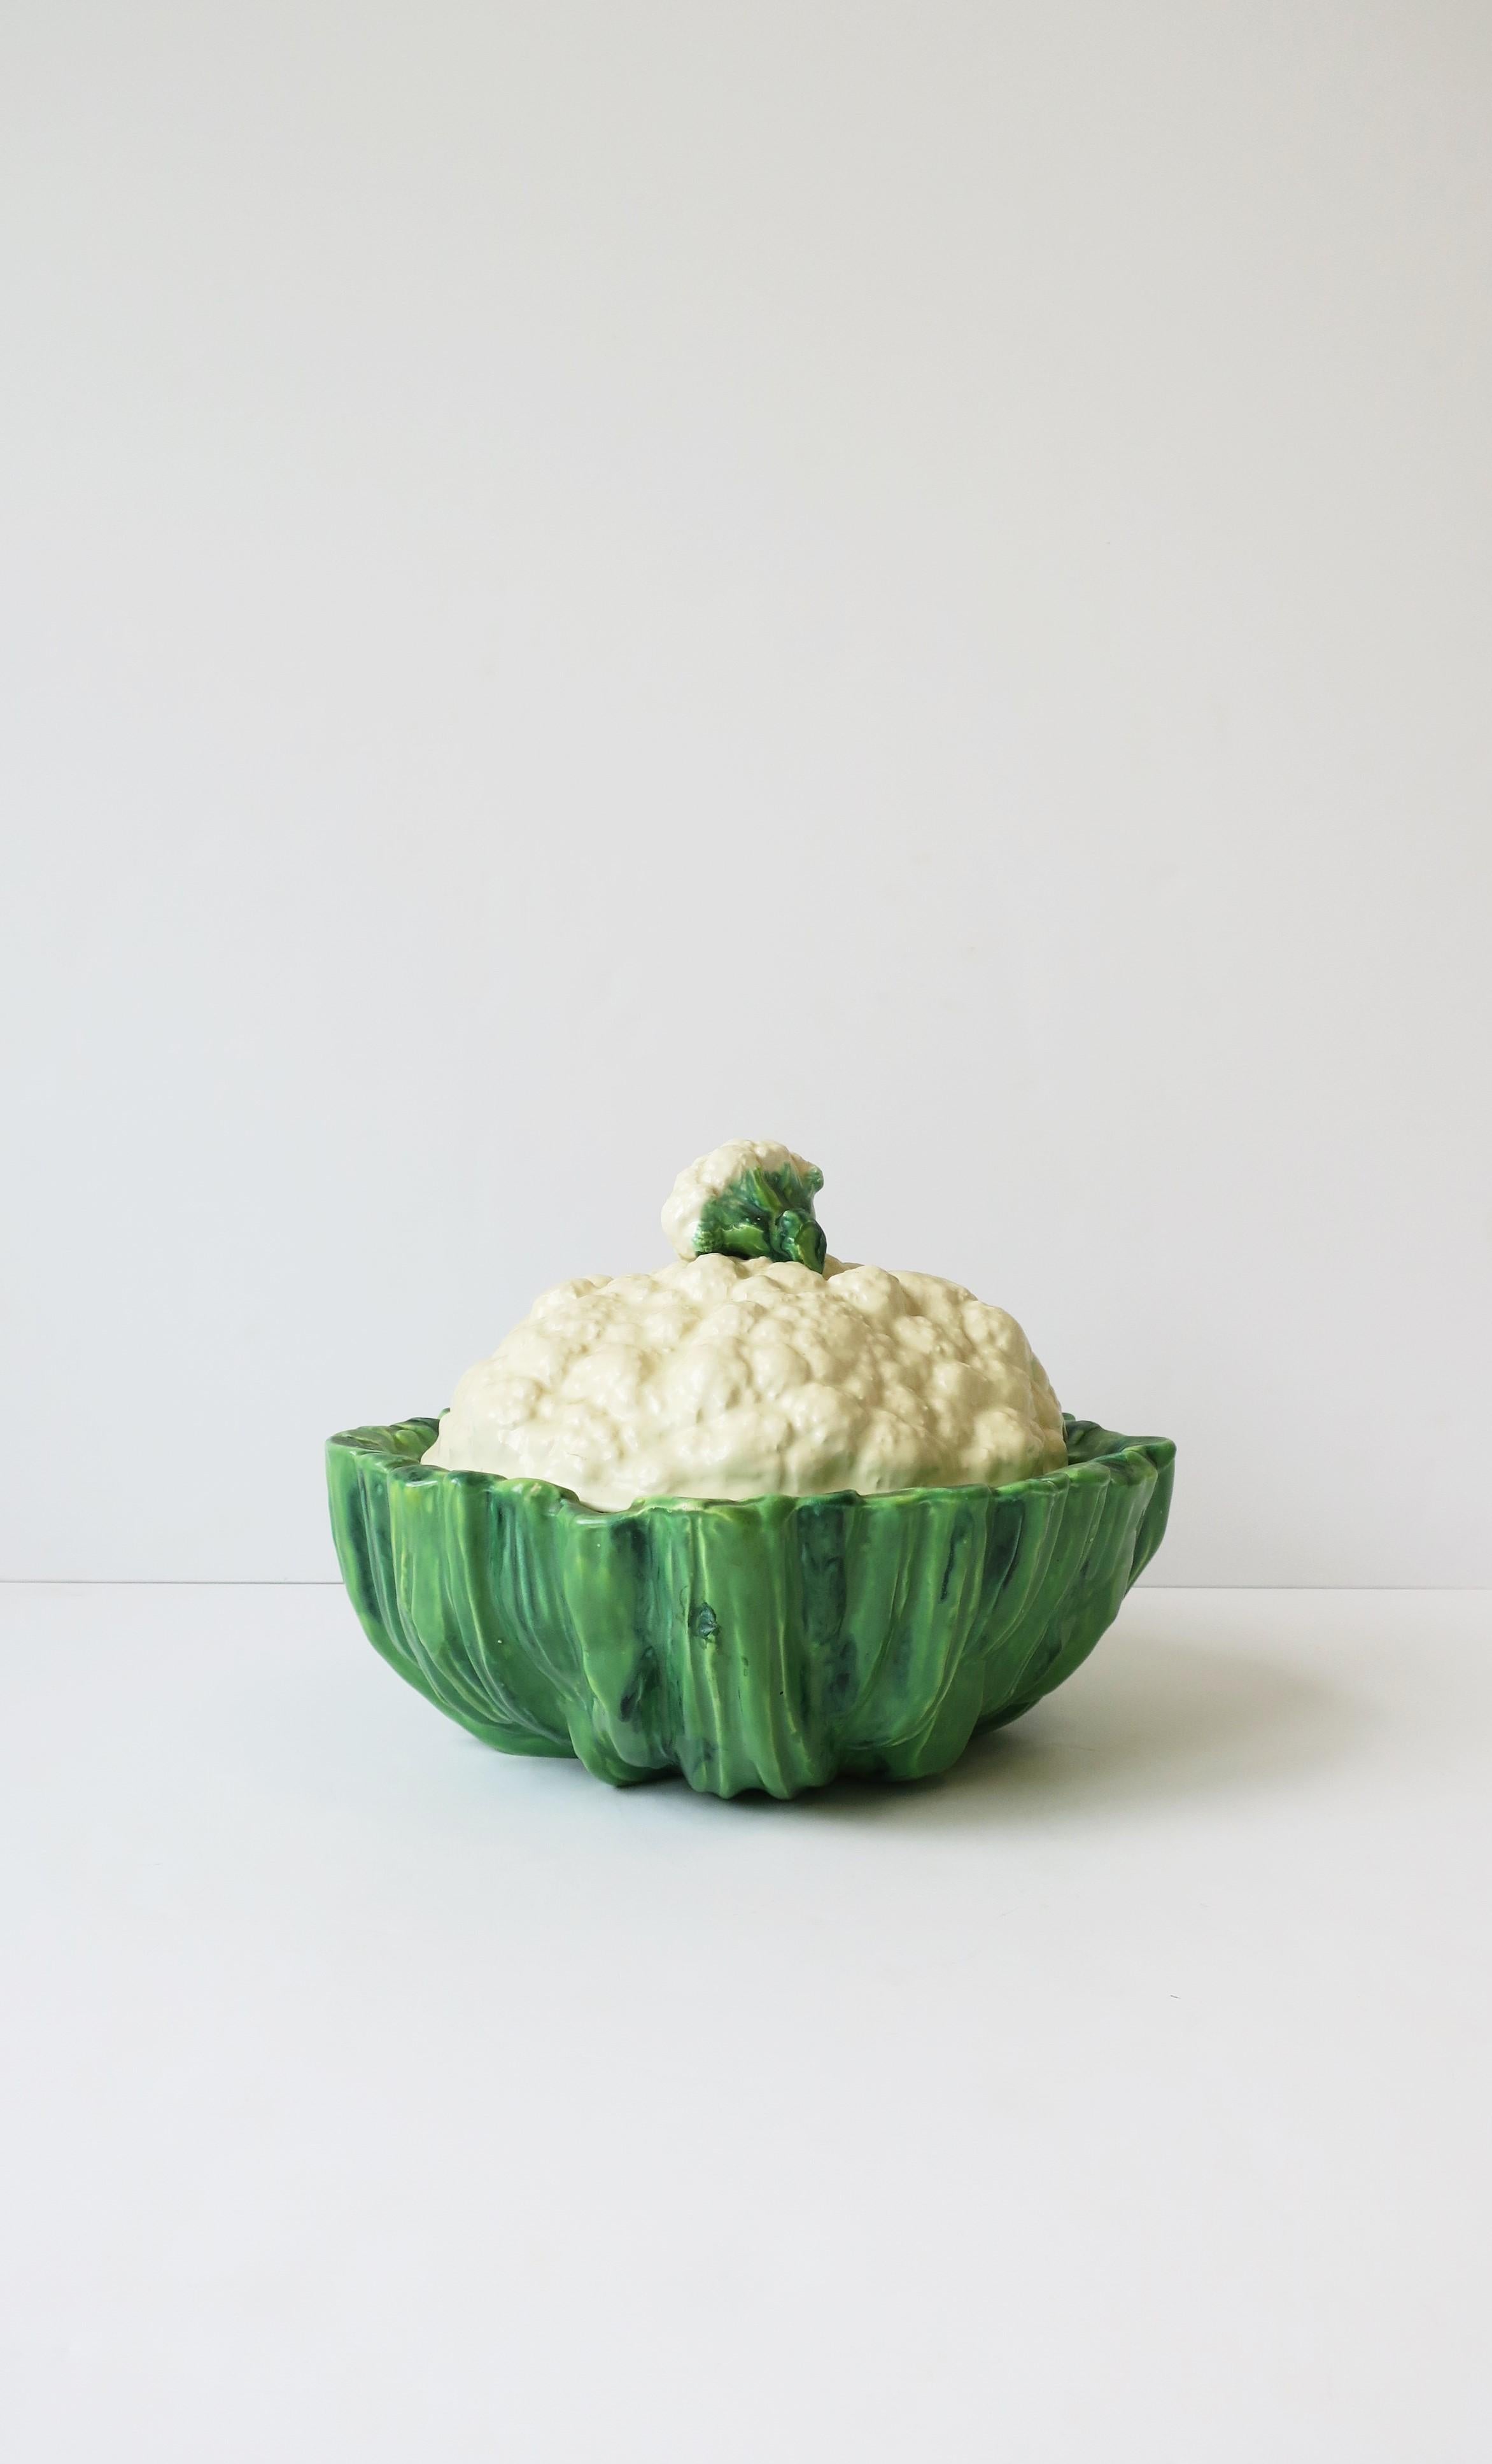 A very beautiful white and green pottery cabbage cauliflower vegetable soup or stew tureen, Trompe l'Oeil style, circa mid-20th century. Tureen has a 'cauliflower' lid with knob and a green stalk/leaf bowl base. Great as a standalone piece or